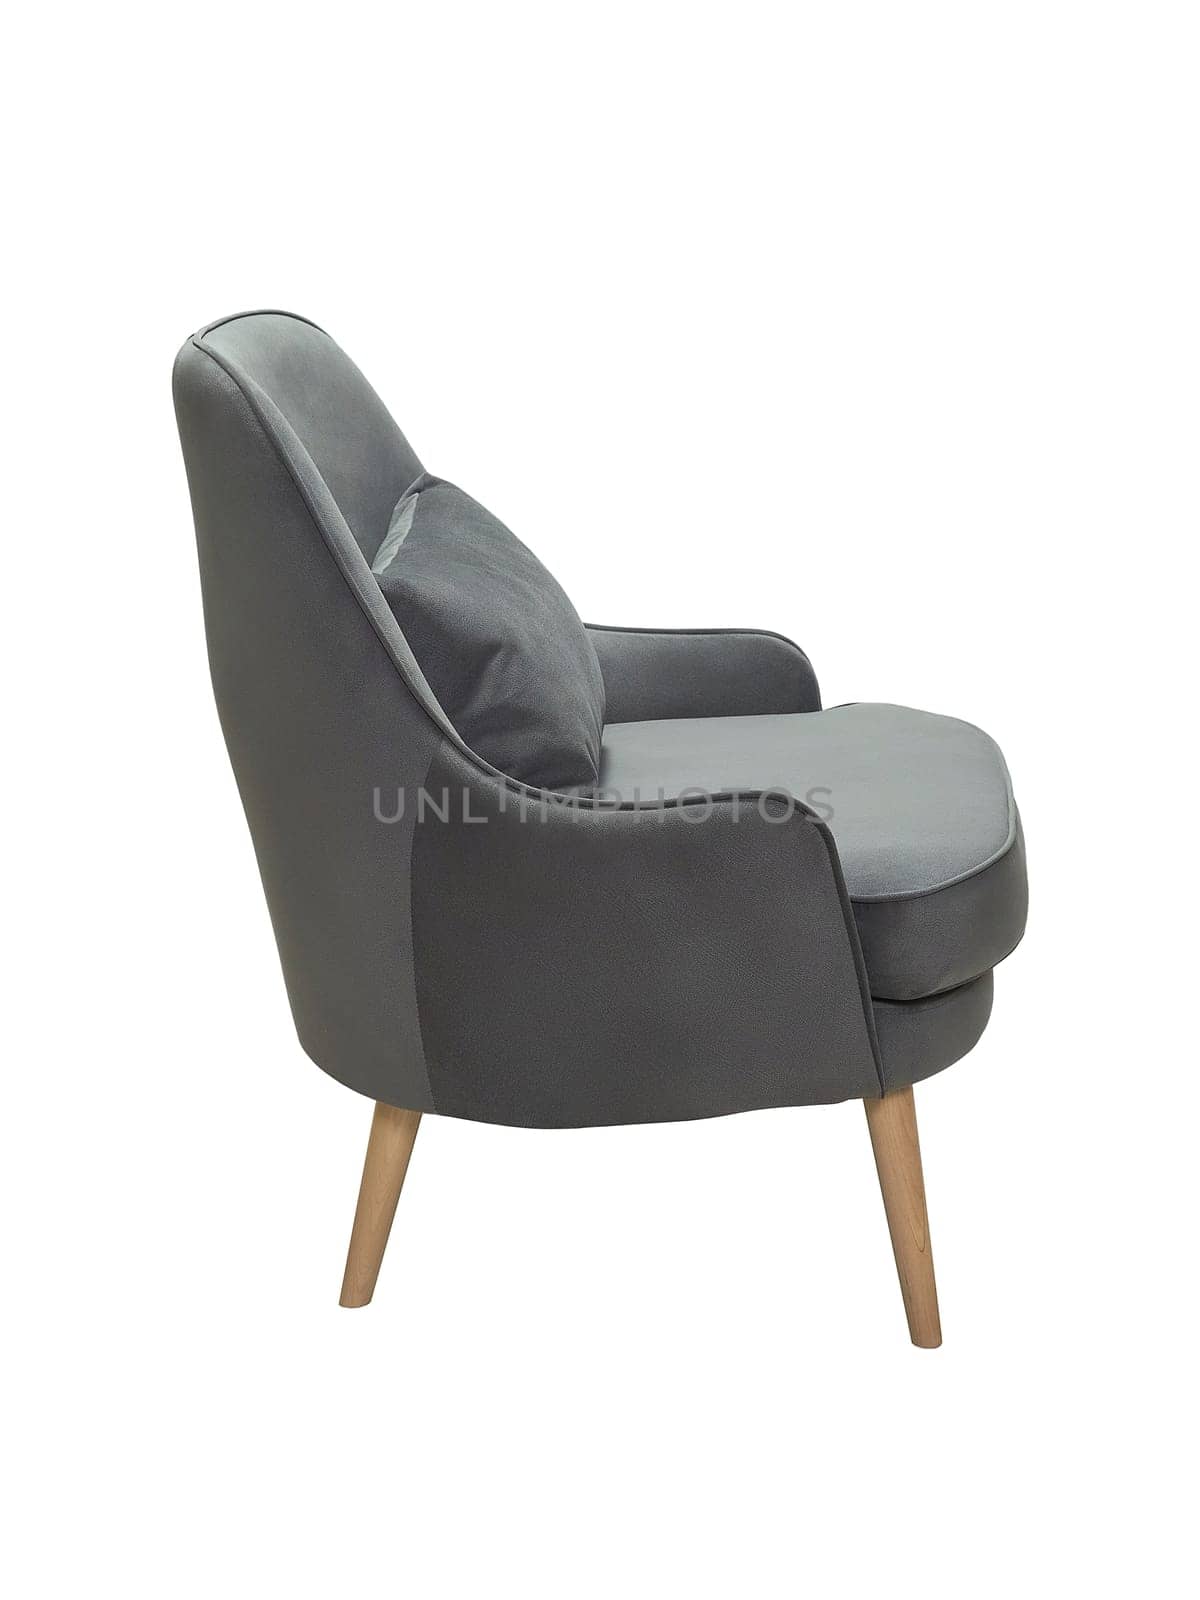 modern gray fabric armchair with wooden legs isolated on white background, side view by artemzatsepilin